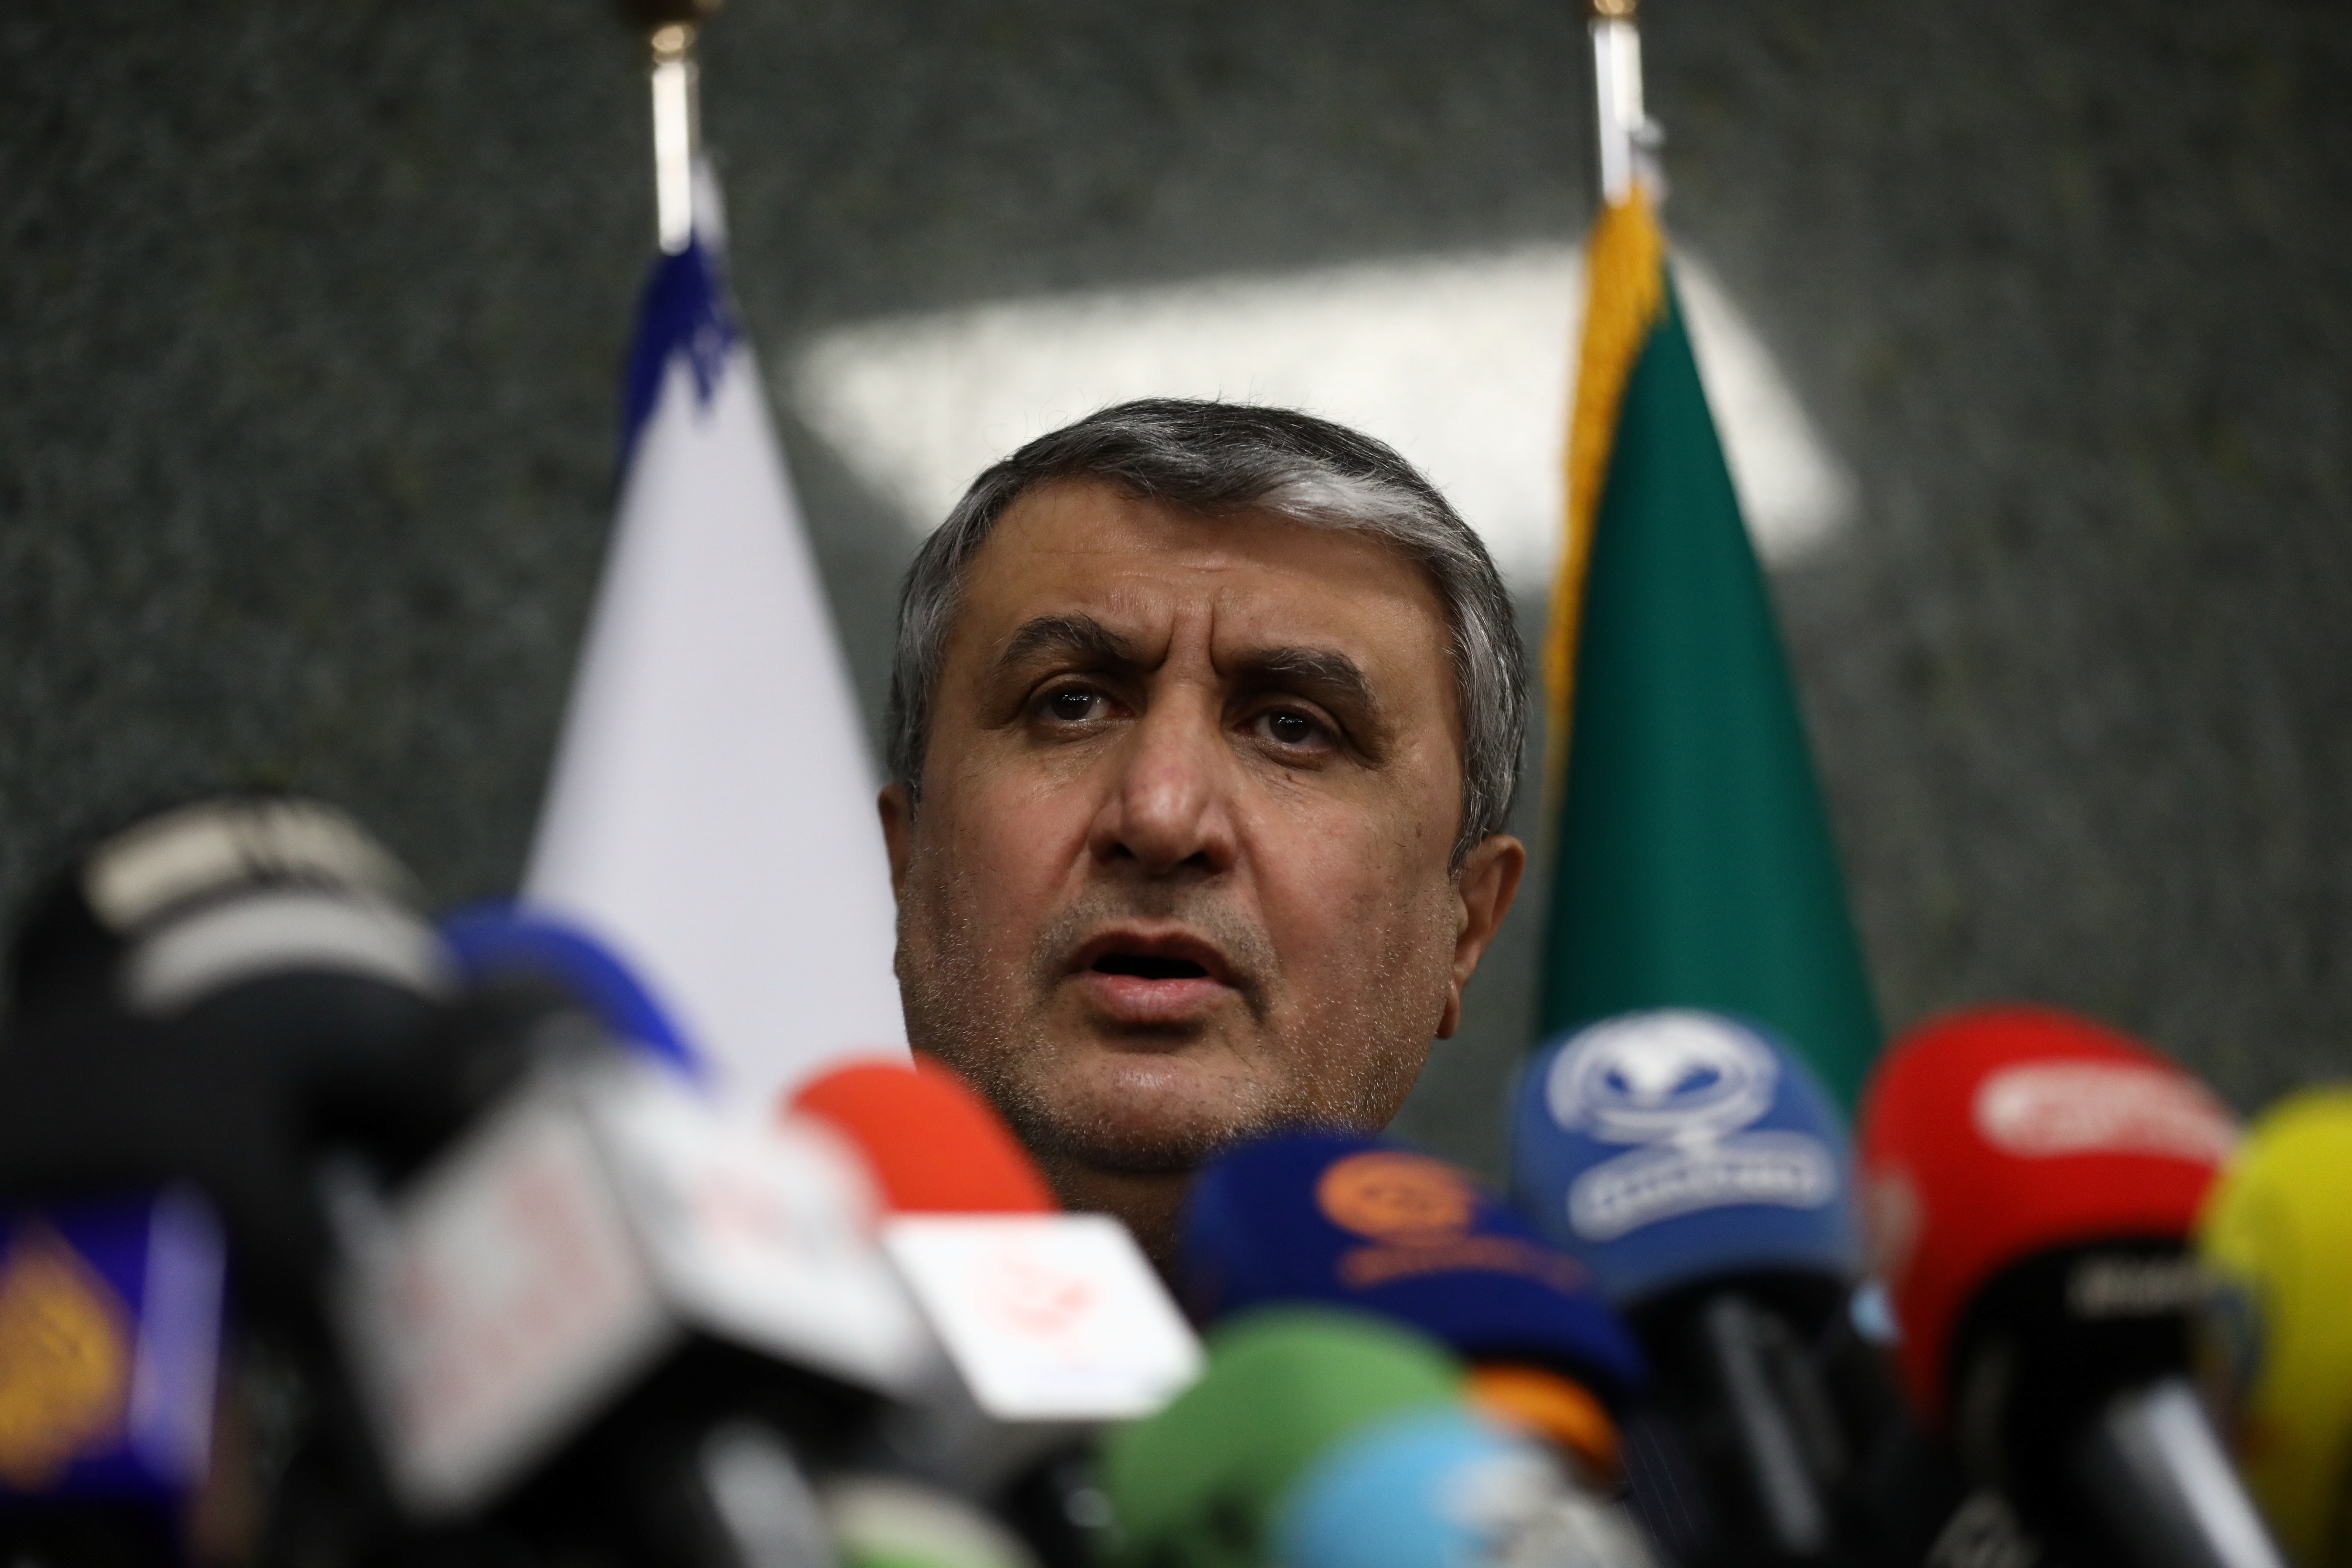 Head of Iran's Atomic Energy Organization Mohammad Eslami looks on during a news conference with International Atomic Energy Agency (IAEA) Director General Rafael Mariano Grossi as they meet in Tehran